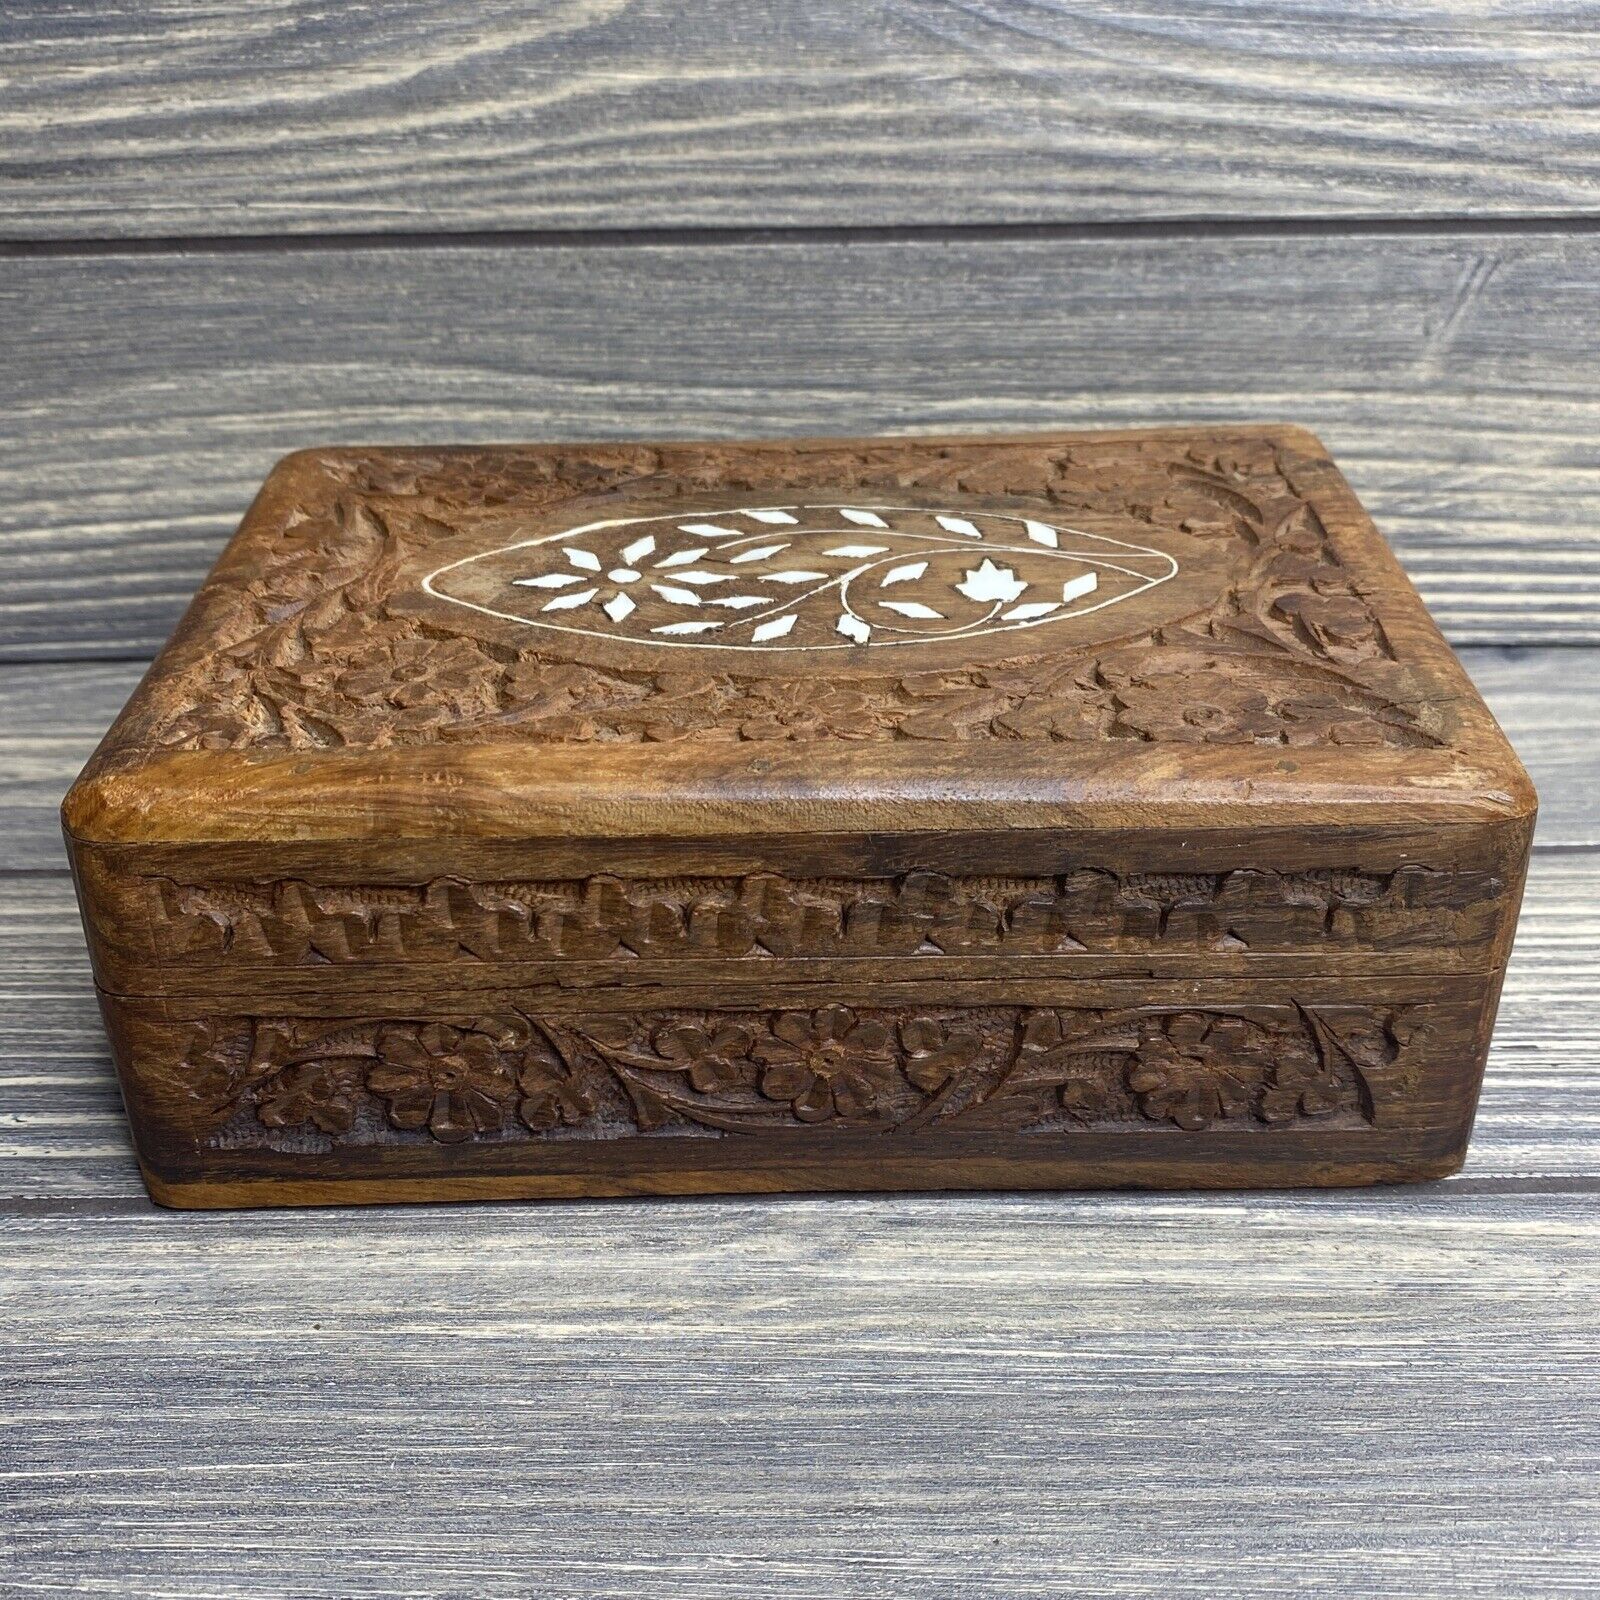 Vintage Hand Carved Wooden Box Floral Inlay Blue Felt Lined 7x4.5x2.5”